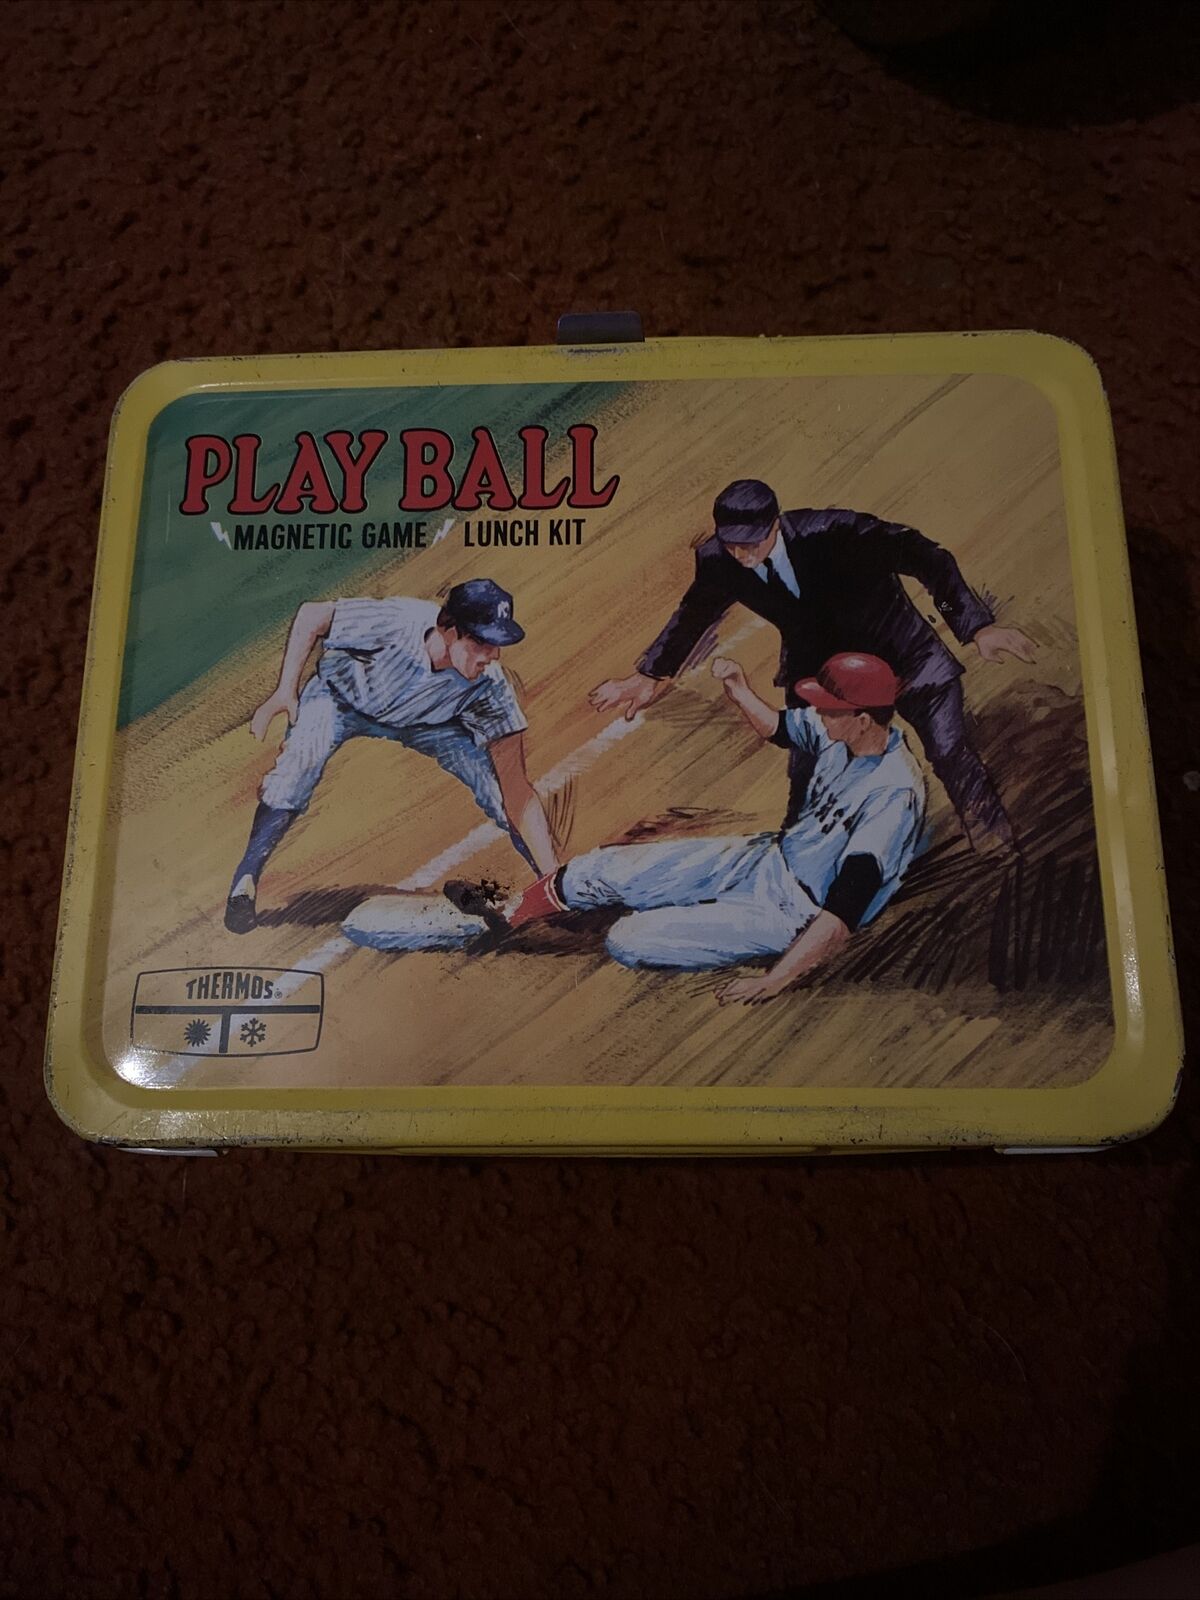 King-Seeley Thermos 1969 Play Ball Magnet Game Lunch Pail